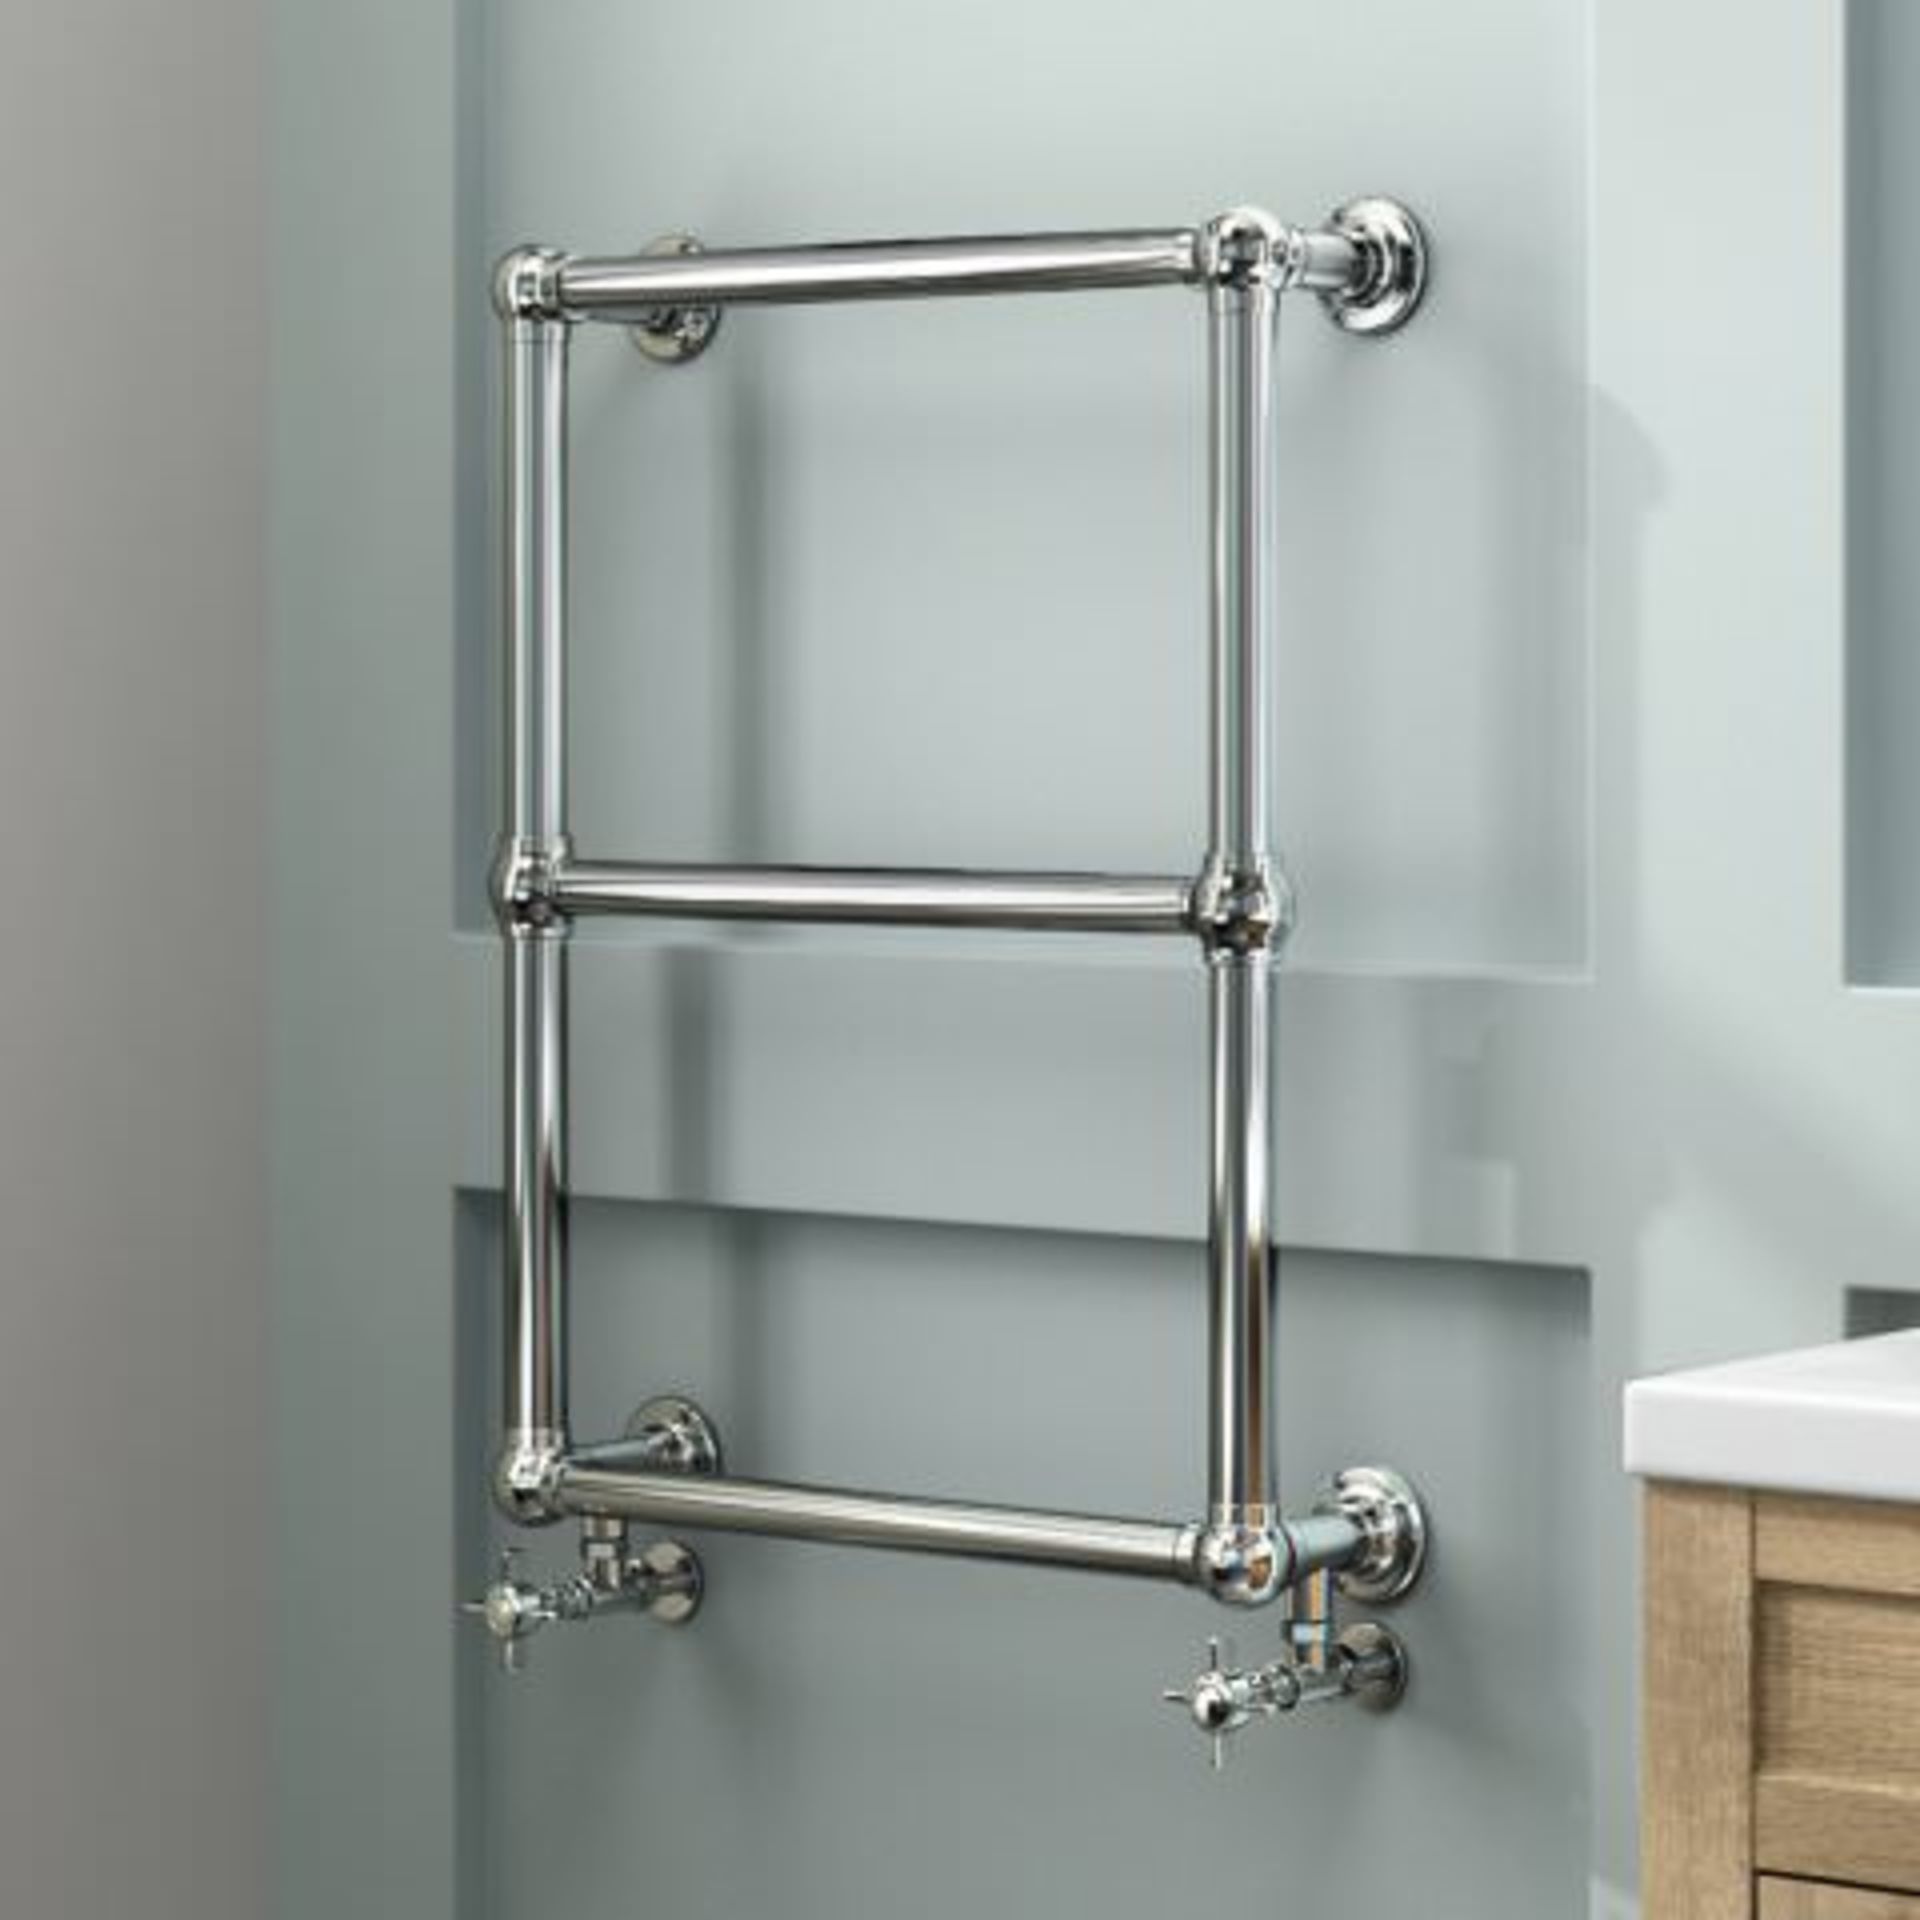 (T191) 695x598mm Traditional Chrome Wall Mounted Towel Rail Radiator - Victoria Premium RRP £284. - Image 6 of 6